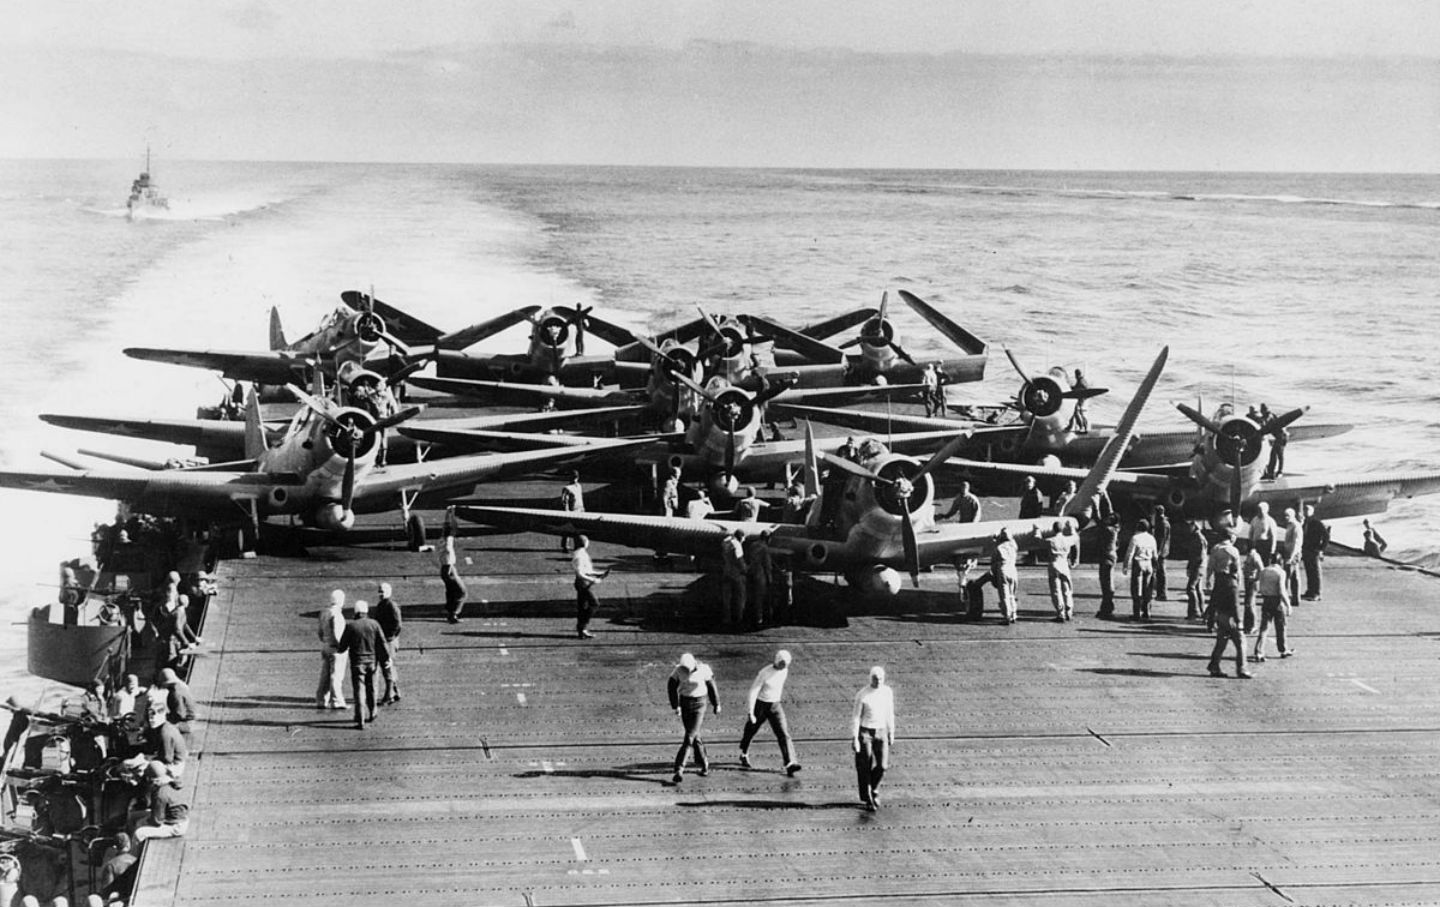 June 7, 1942: Battle of Midway Ends in Allied Victory